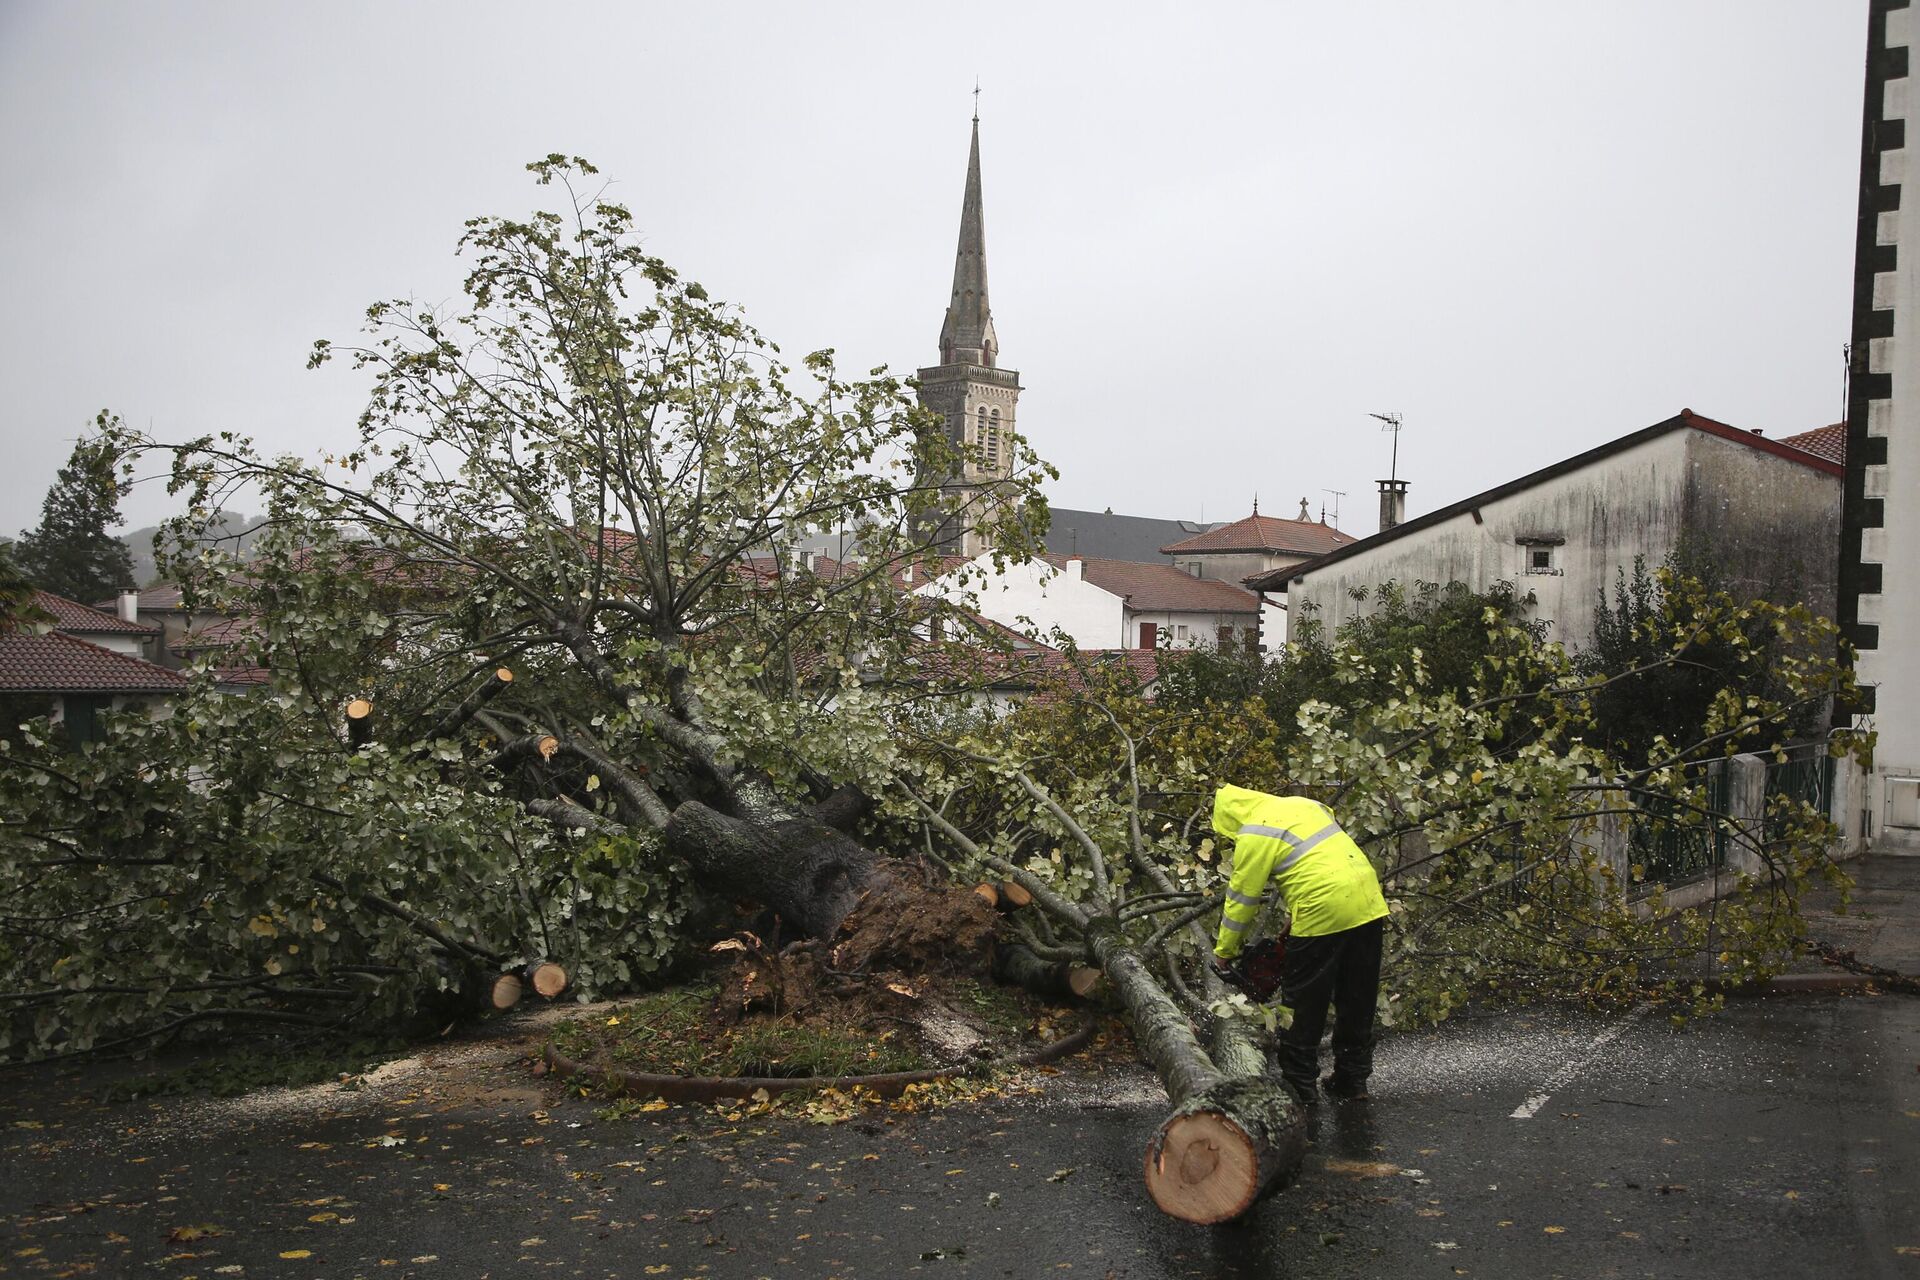 A man saws a tree that fell on a parking lot Thursday, Nov. 2, 2023 in Hasparren, southwestern France. Winds up to 180 kilometers per hour (108 mph) slammed the French Atlantic coast overnight along with violent rains and huge waves, as Storm Ciaran uprooted trees, blew out windows and left 1.2 million households without electricity. - Sputnik International, 1920, 02.11.2023